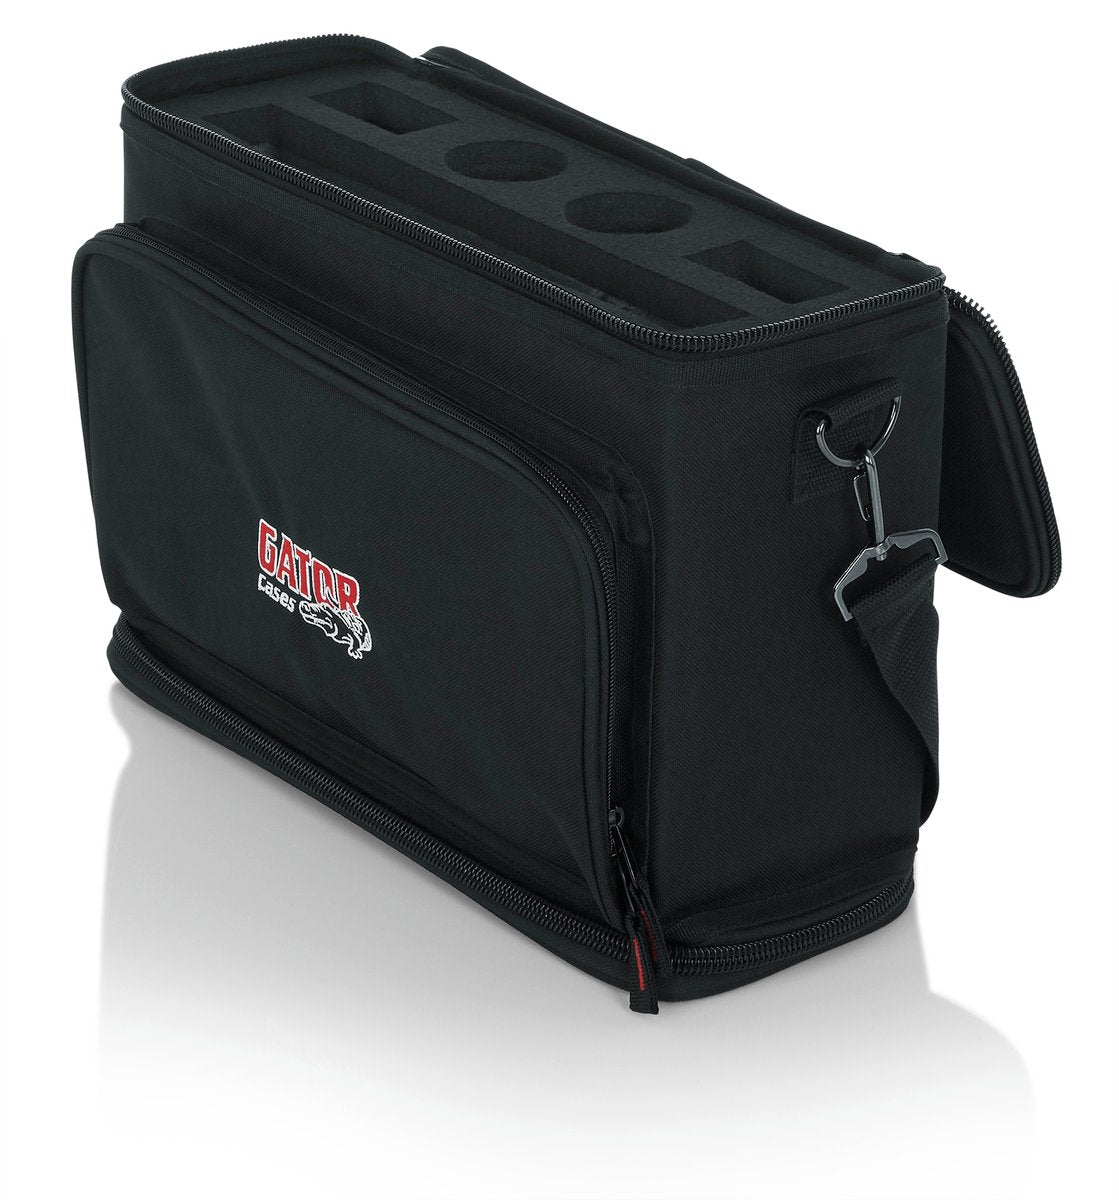 Carry Bag to Hold Shure BLX Style Wireless Systems with Two Microphones and Two Bodypacks